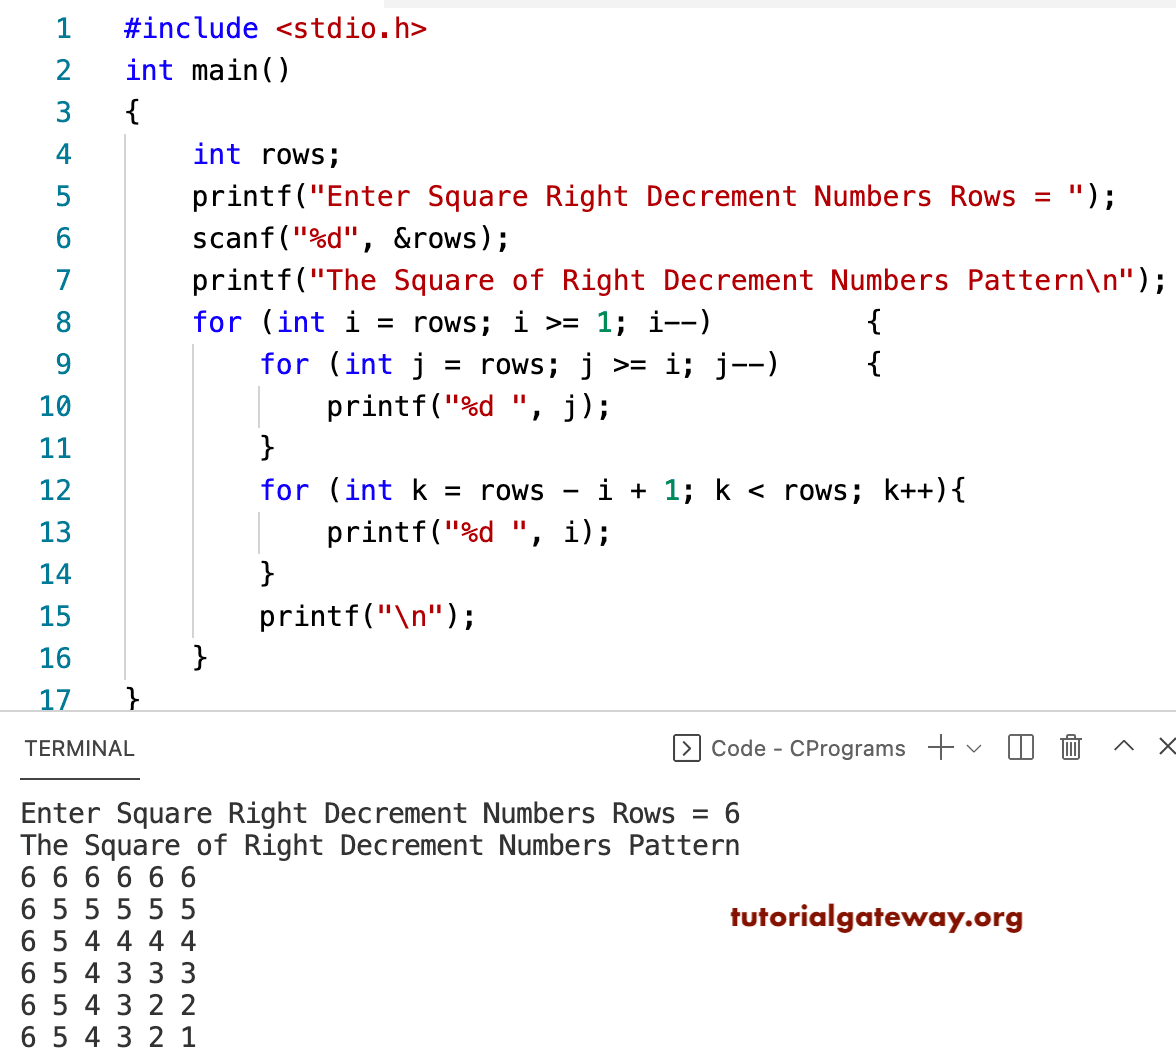 C Program to Print Square of Right Decrement Numbers Pattern